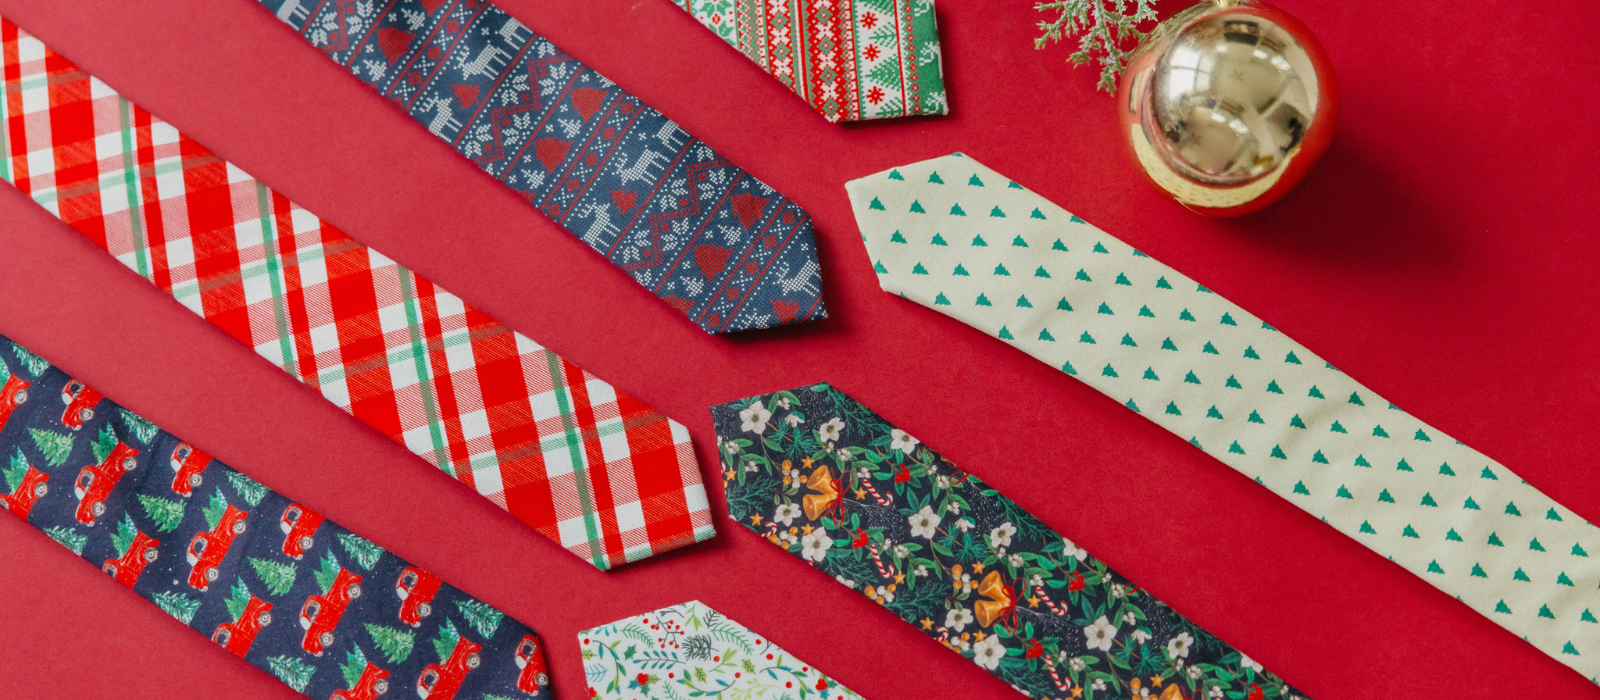 7 Limited Edition Christmas Print Ties on a red background. 